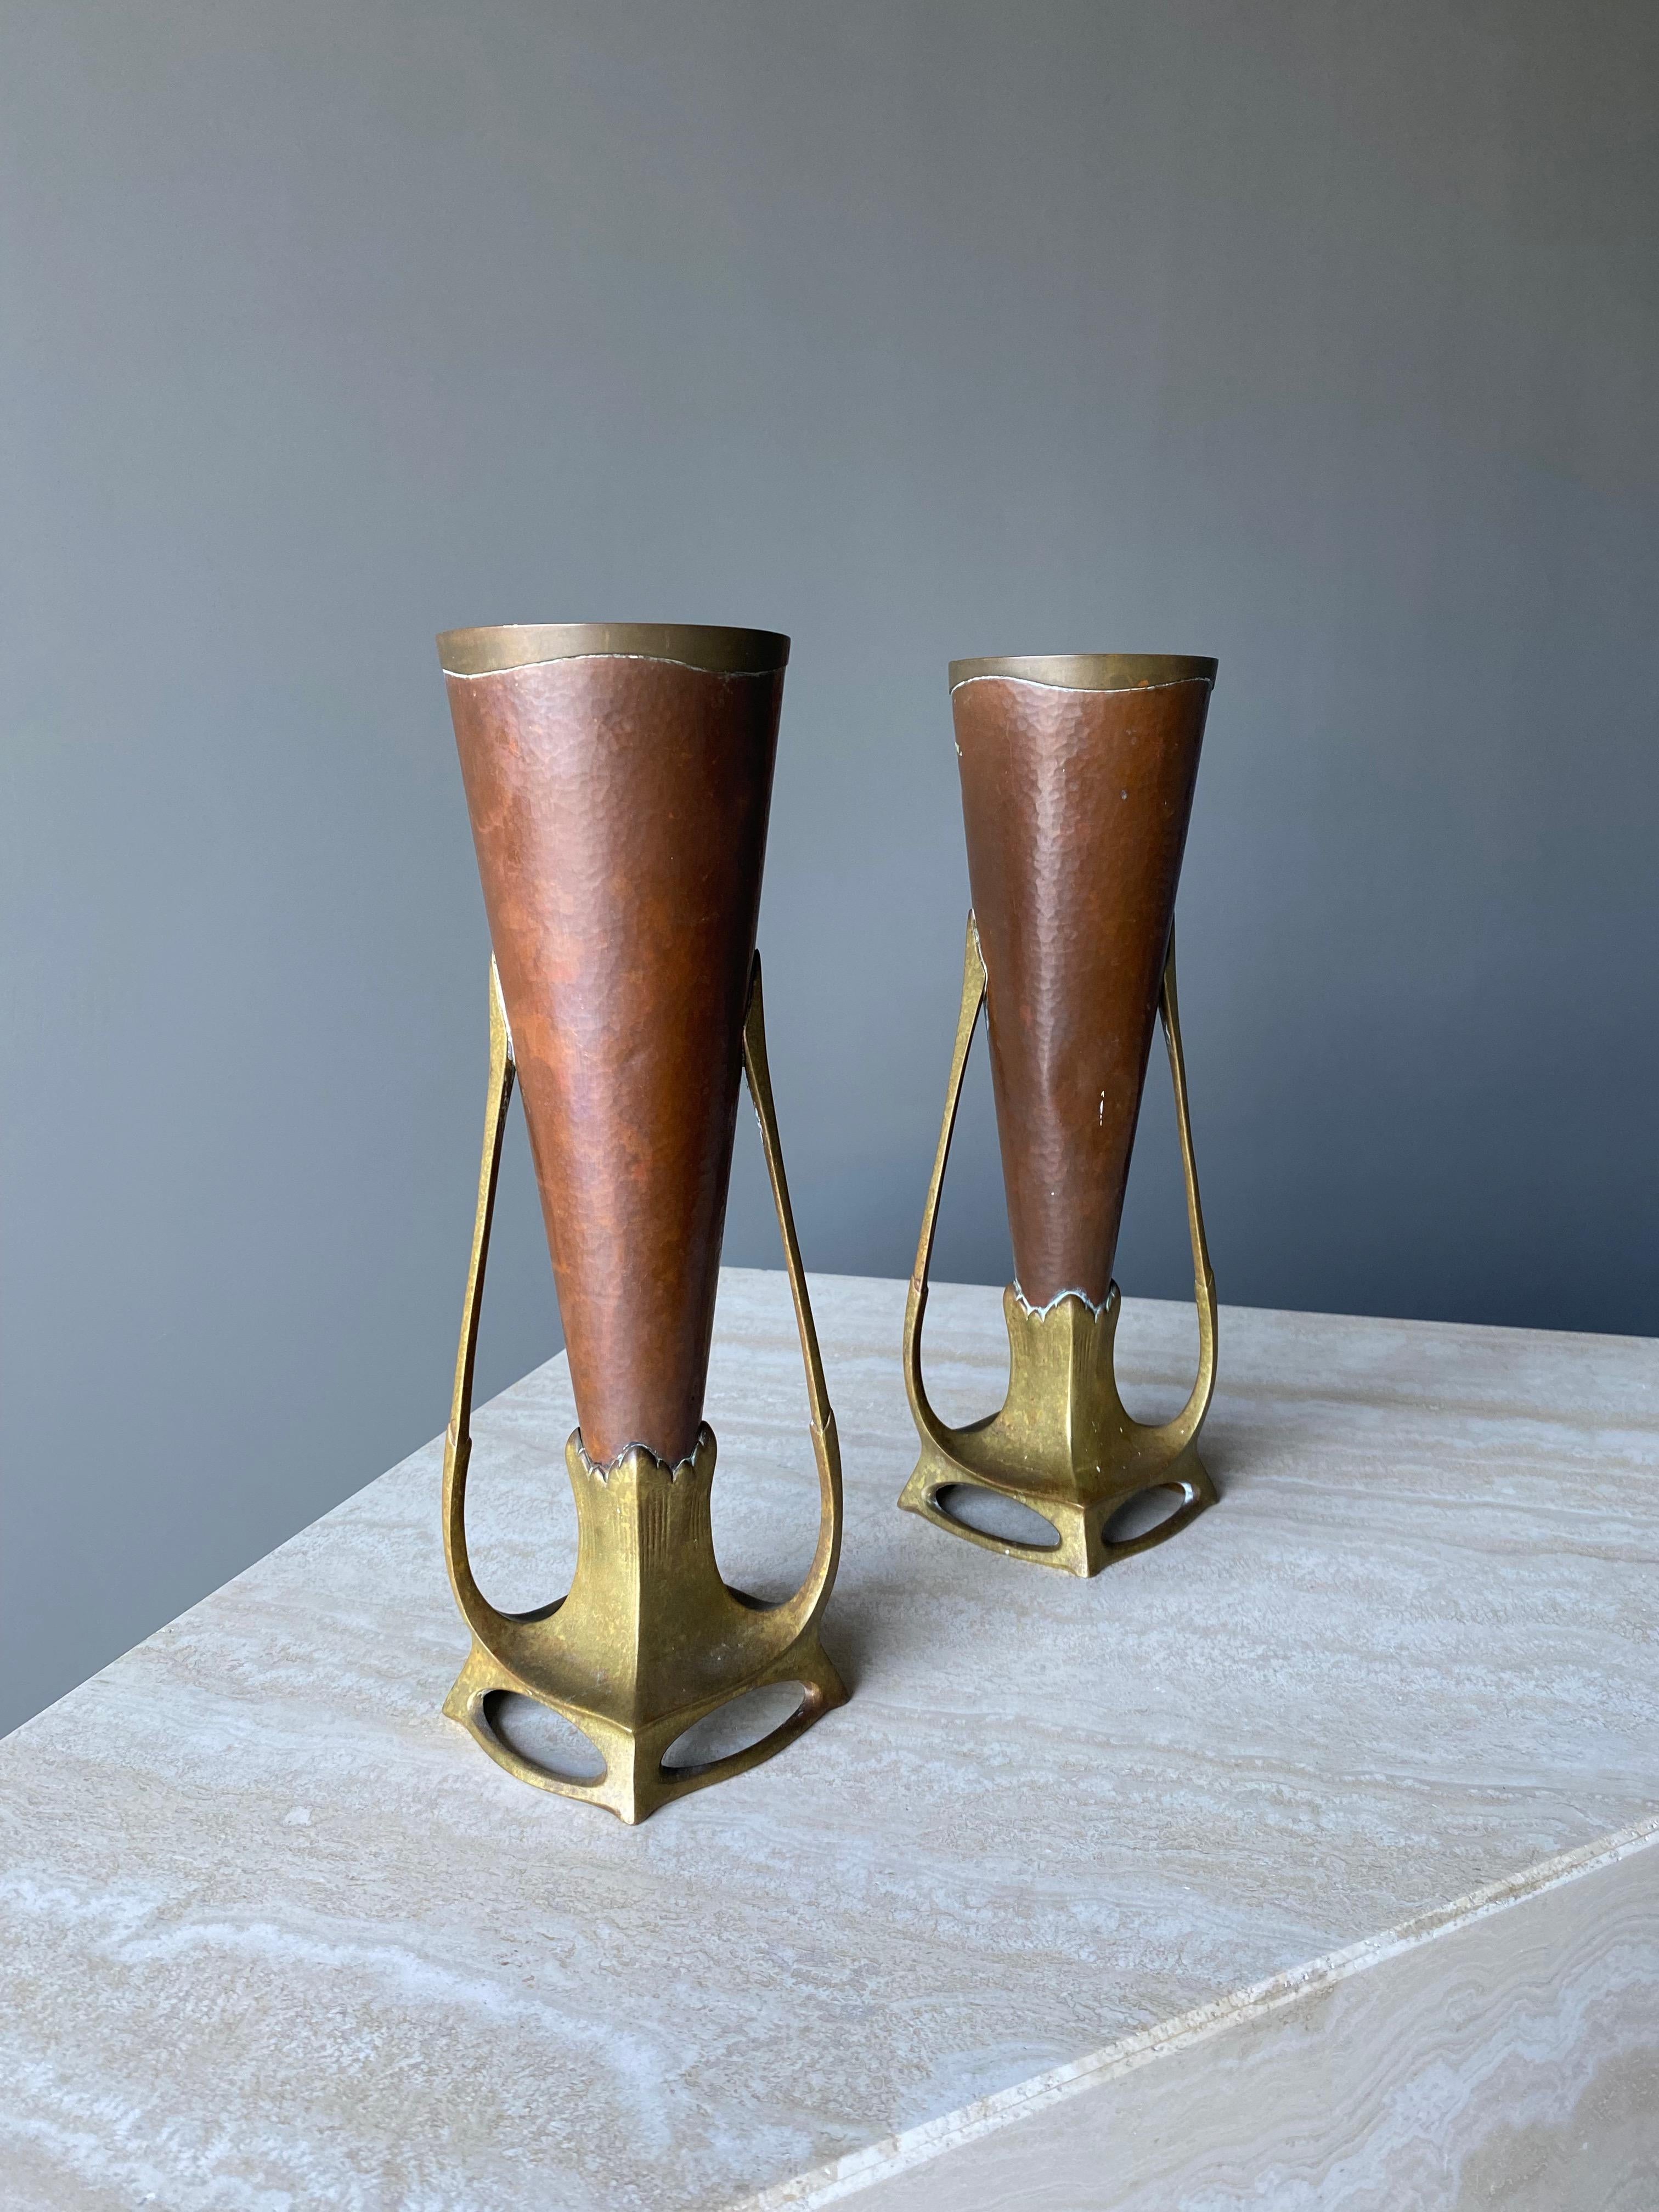 Carl Deffner Pair of Hammered Copper & Cast Bronze Vases, Germany, circa 1900 For Sale 7